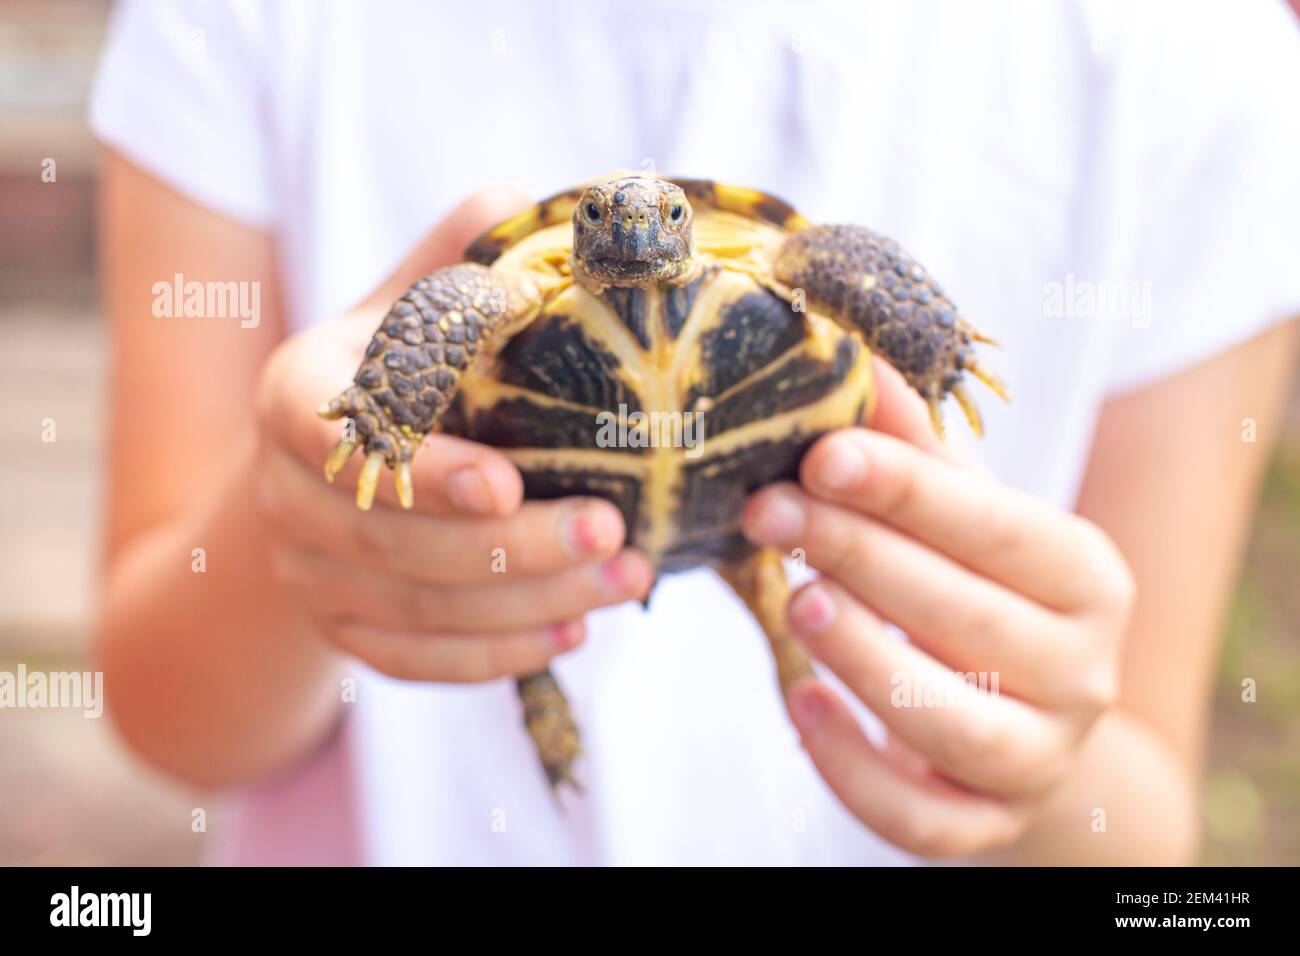 Central Asian land turtle in the hands of a child looks at the camera. Stock Photo